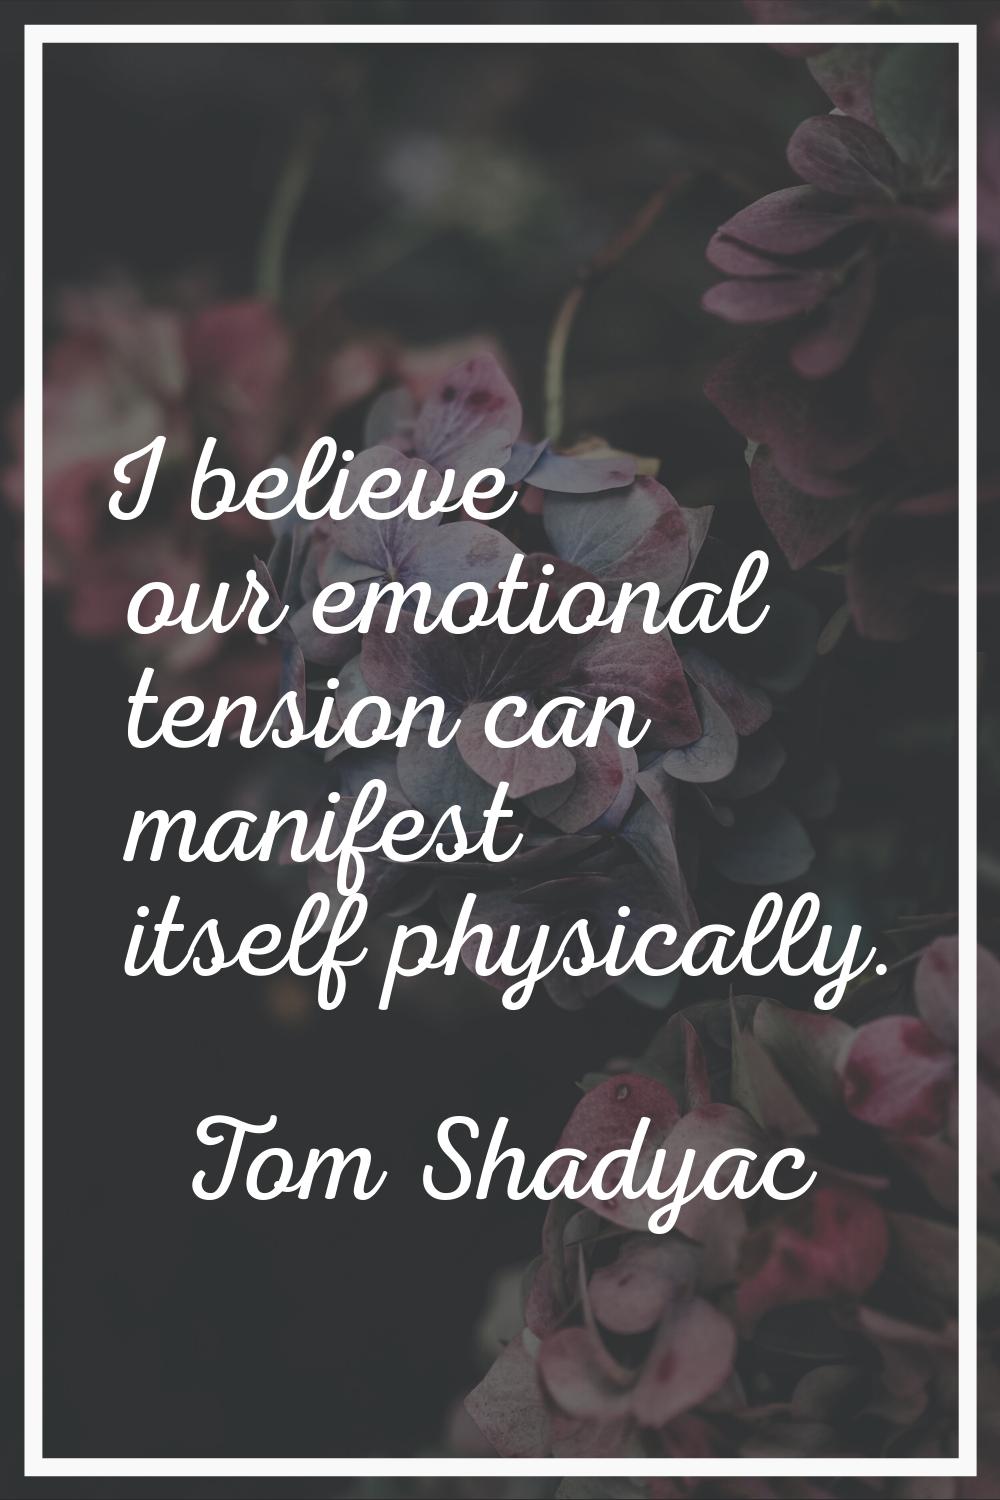 I believe our emotional tension can manifest itself physically.